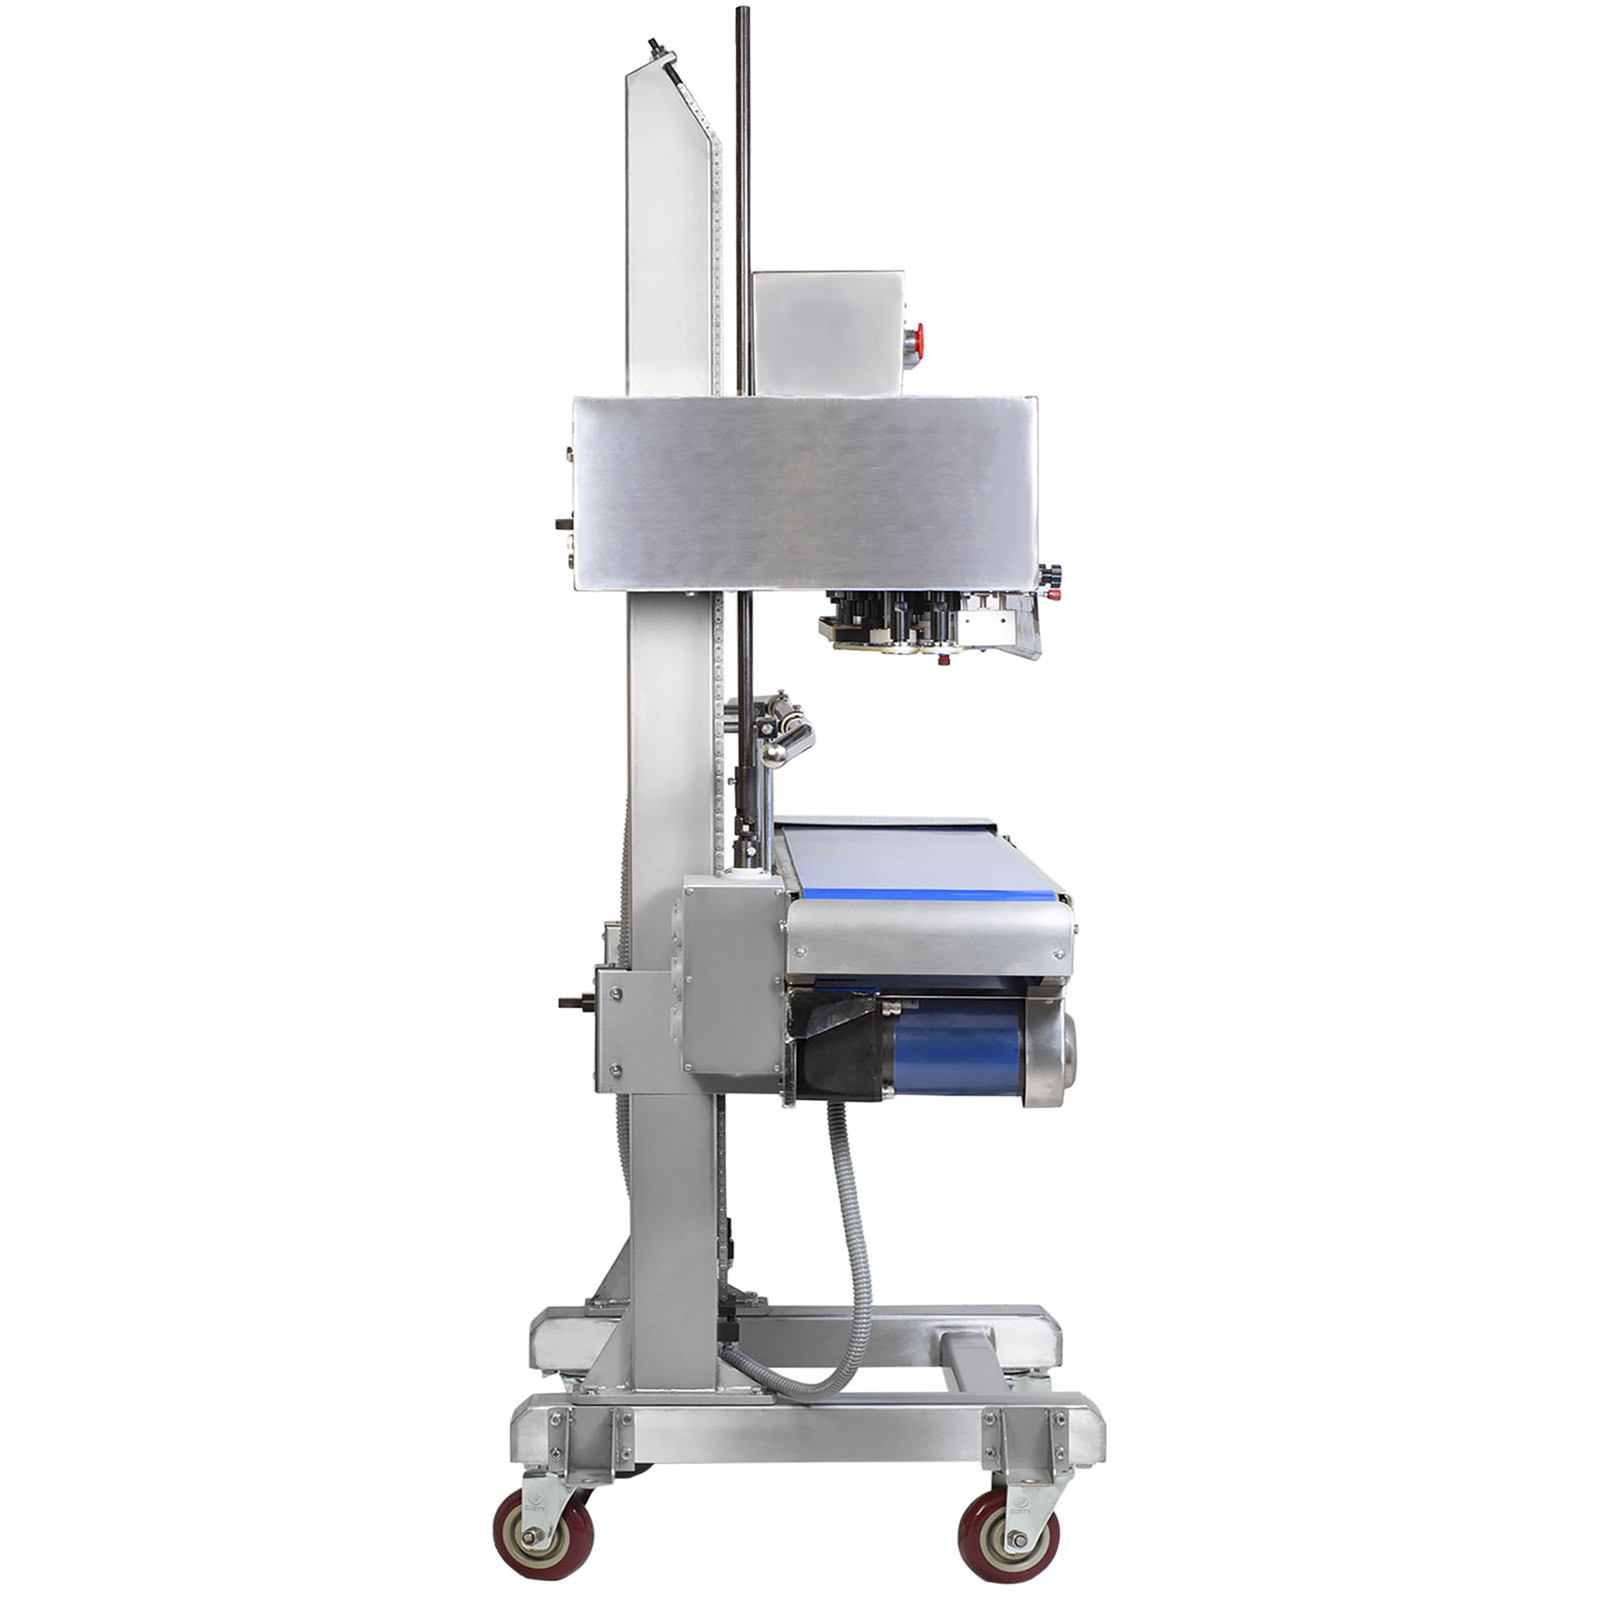 Side view of the JORES TECHNOLOGIES® stainless steel continuous band sealer with green revolving band and heavy duty wheels over white background. Image show the side where the bag is coded and the end of the sealing process